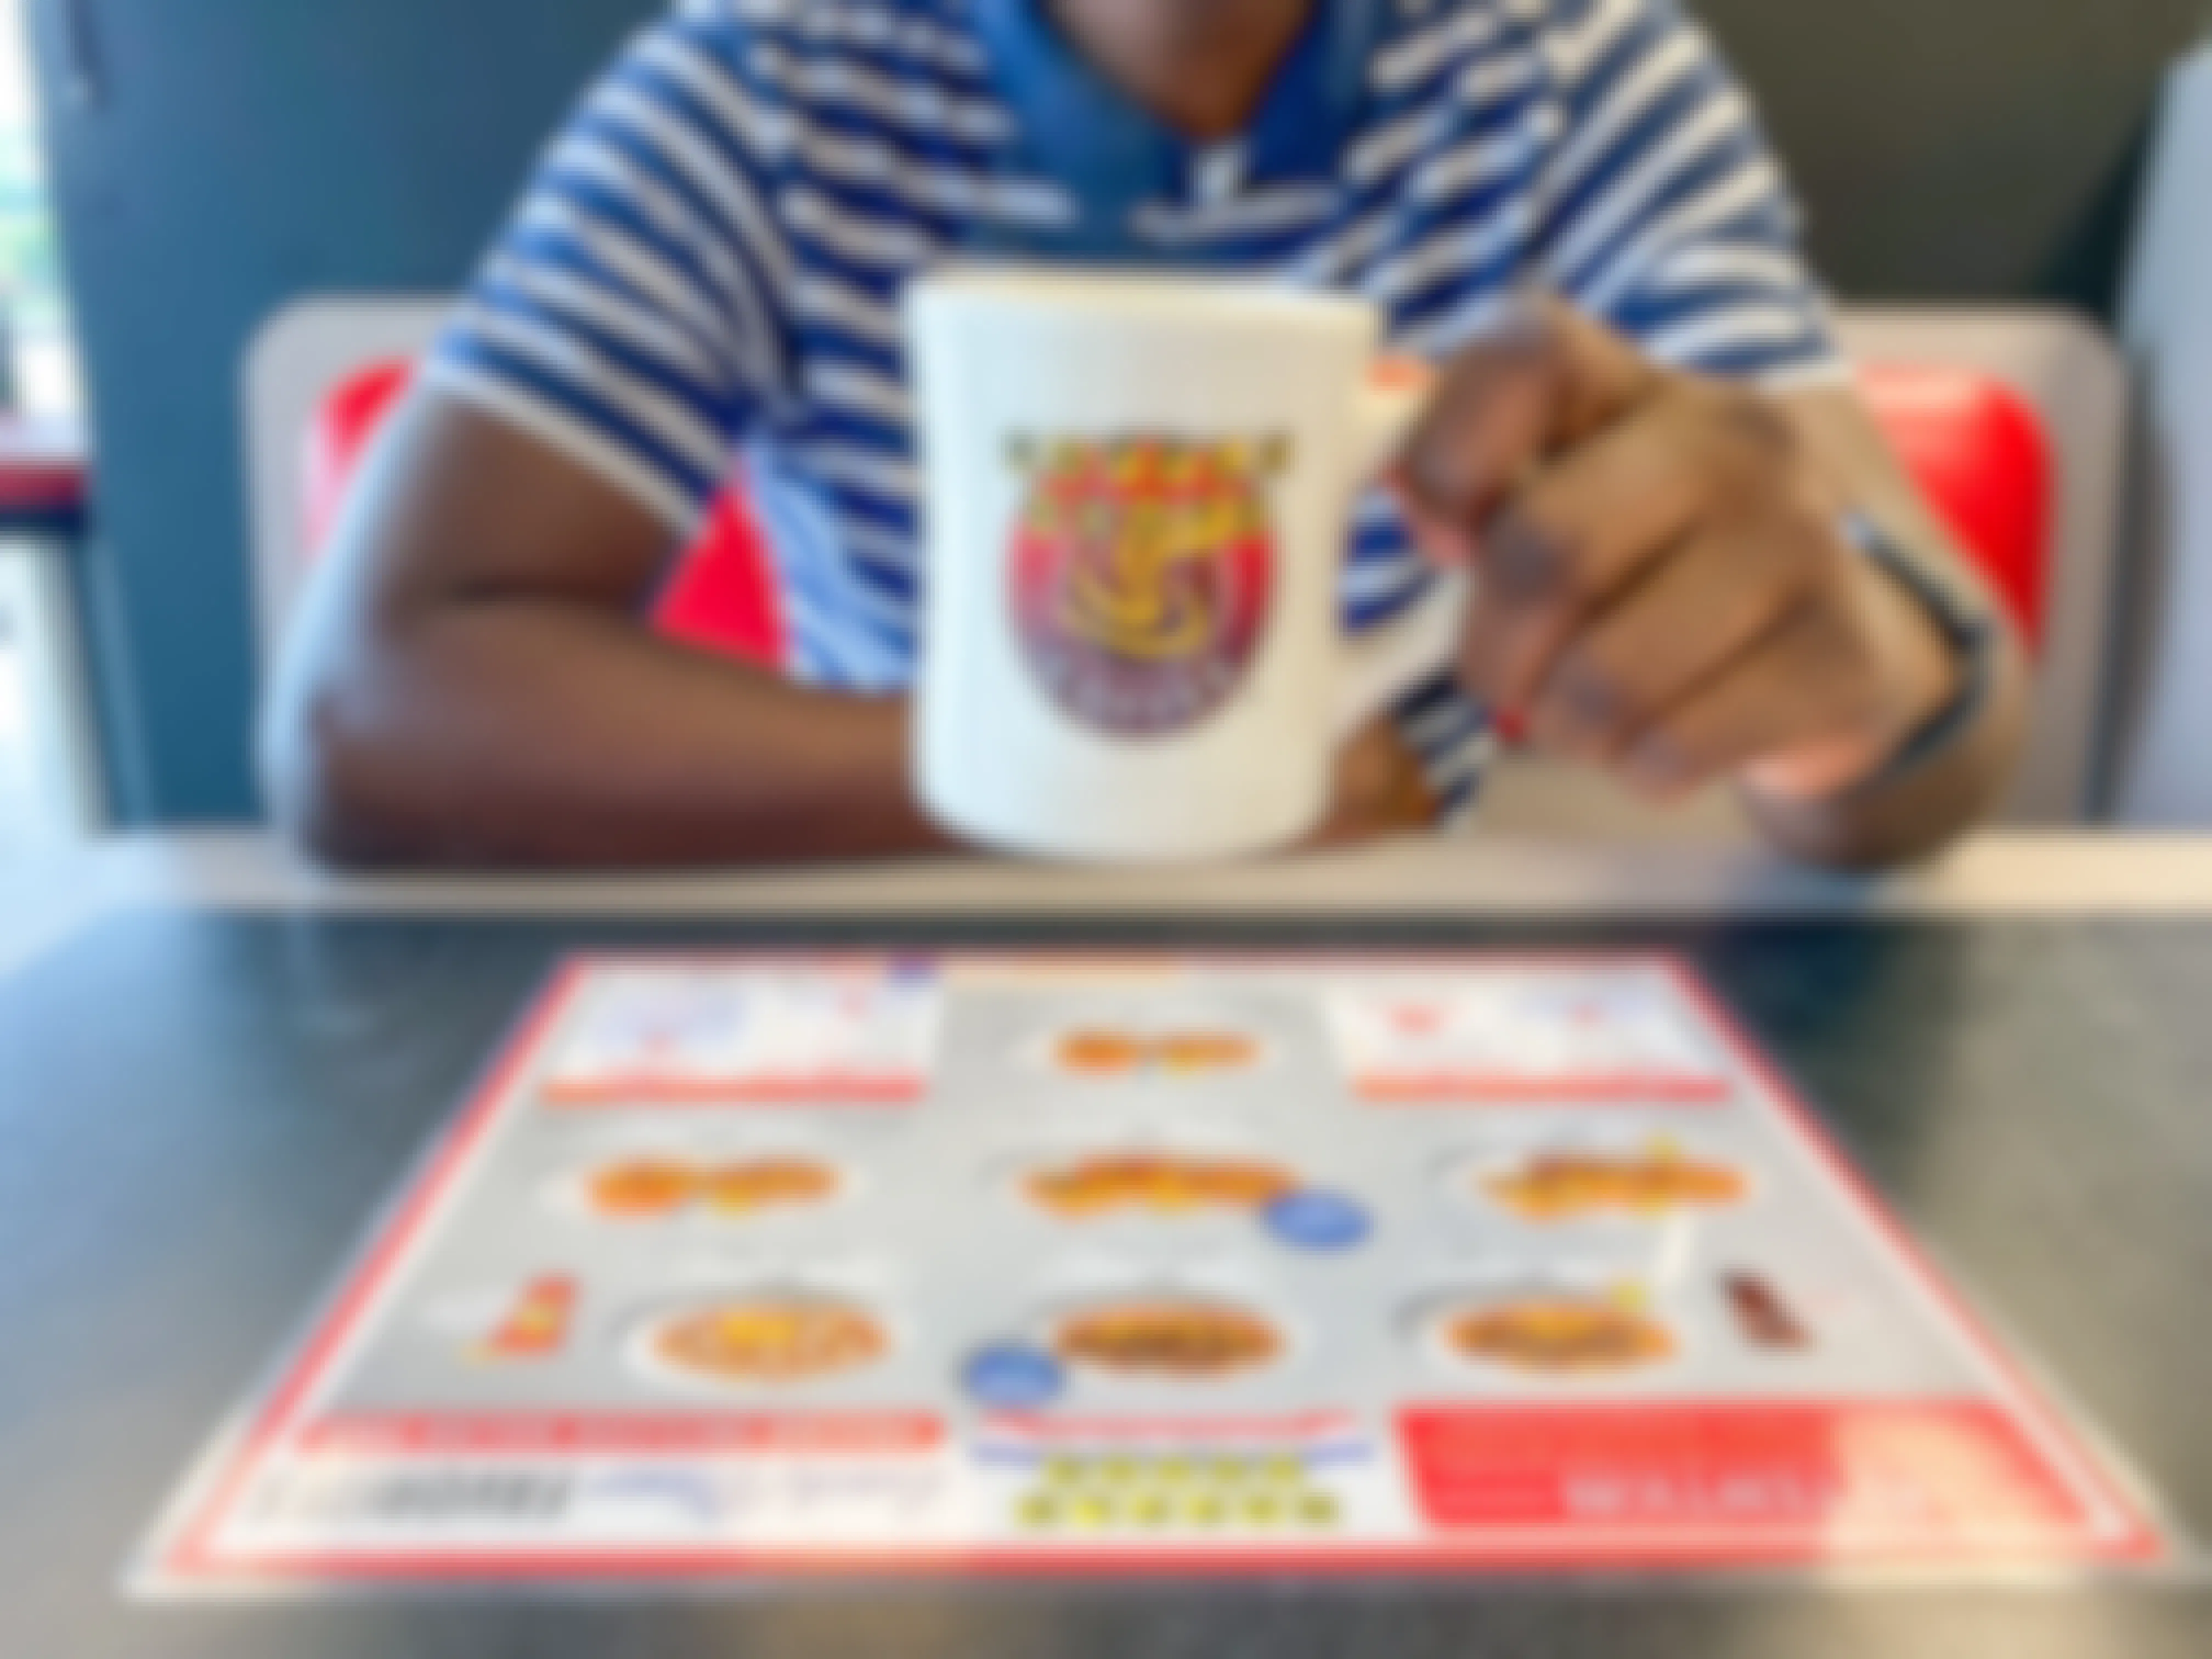 A person holding up a Waffle House coffee mug while sitting at a booth inside Waffle House.